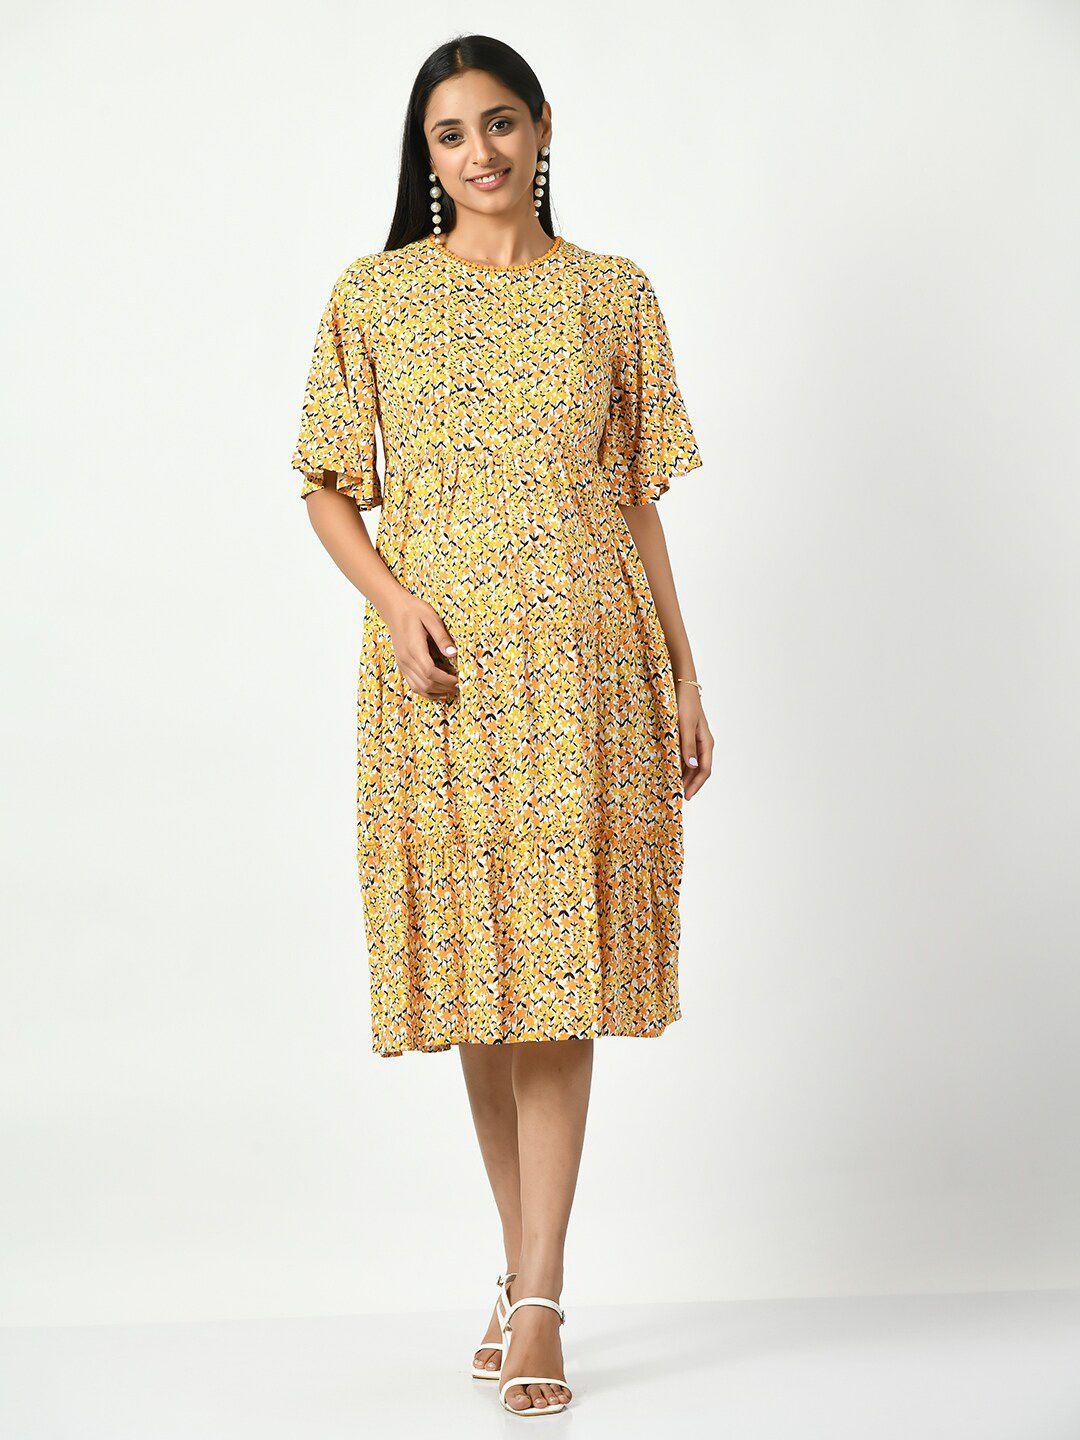 aaruvi ruchi verma yellow floral print flared sleeve maternity fit & flare dress